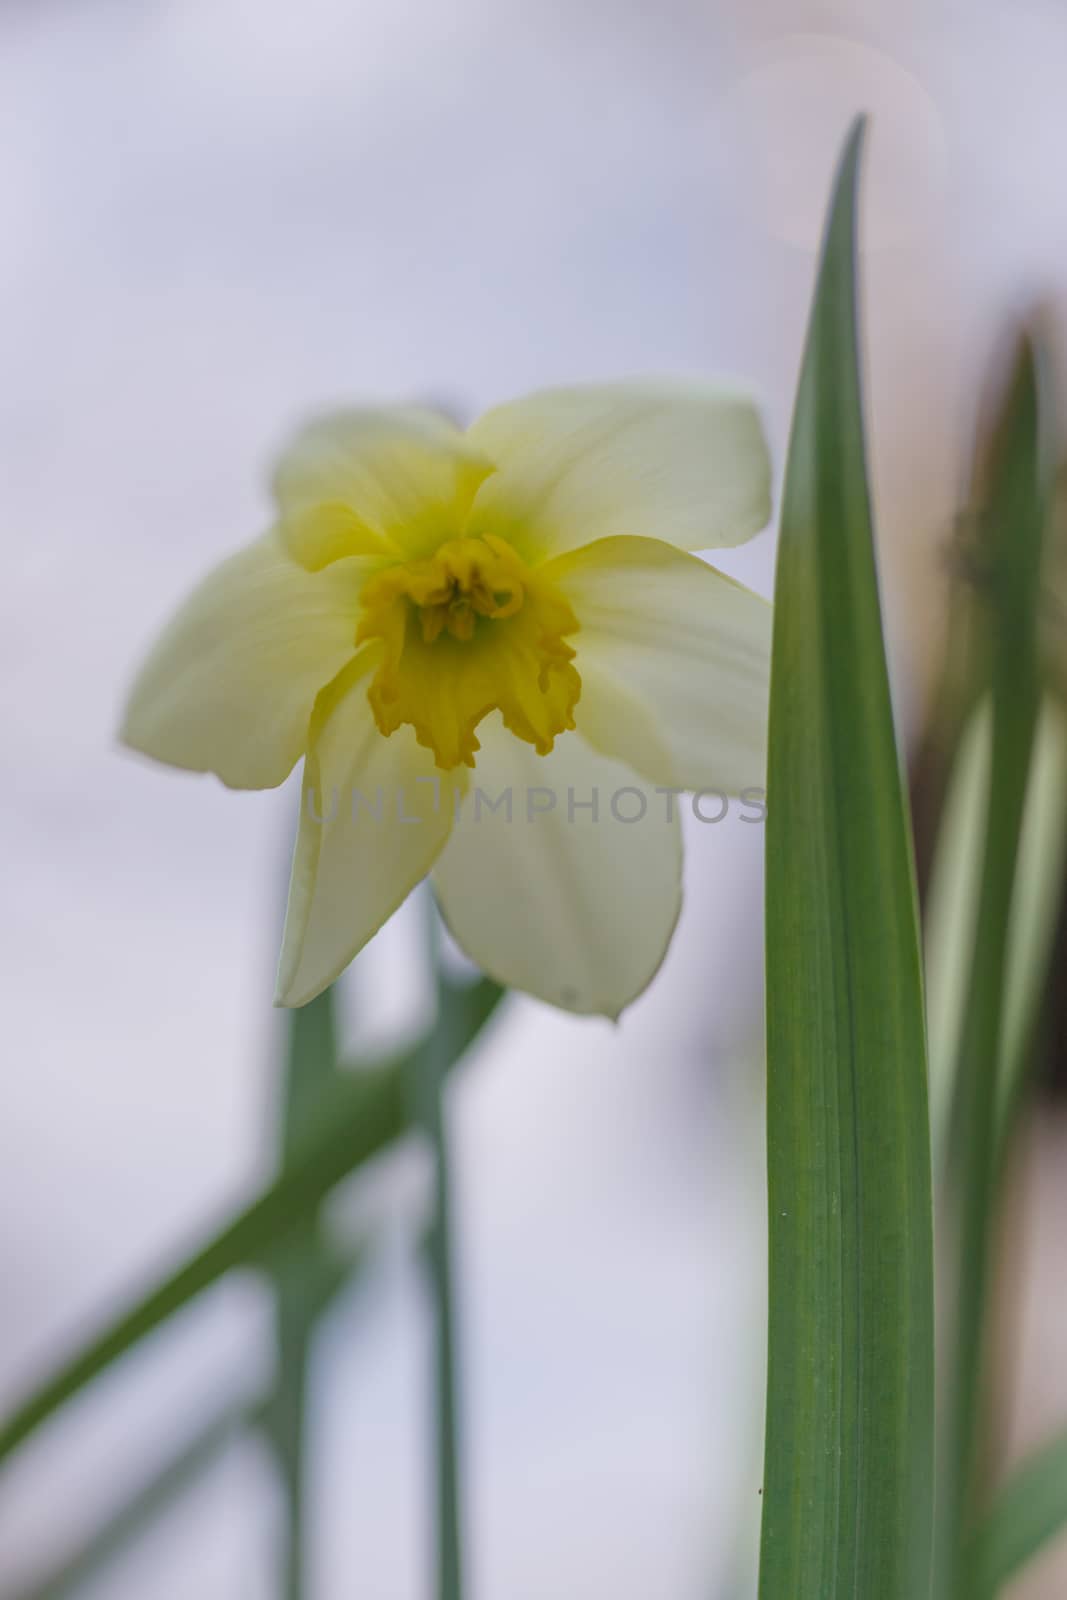 A white daffodil flower on light brurred background. by alexsdriver